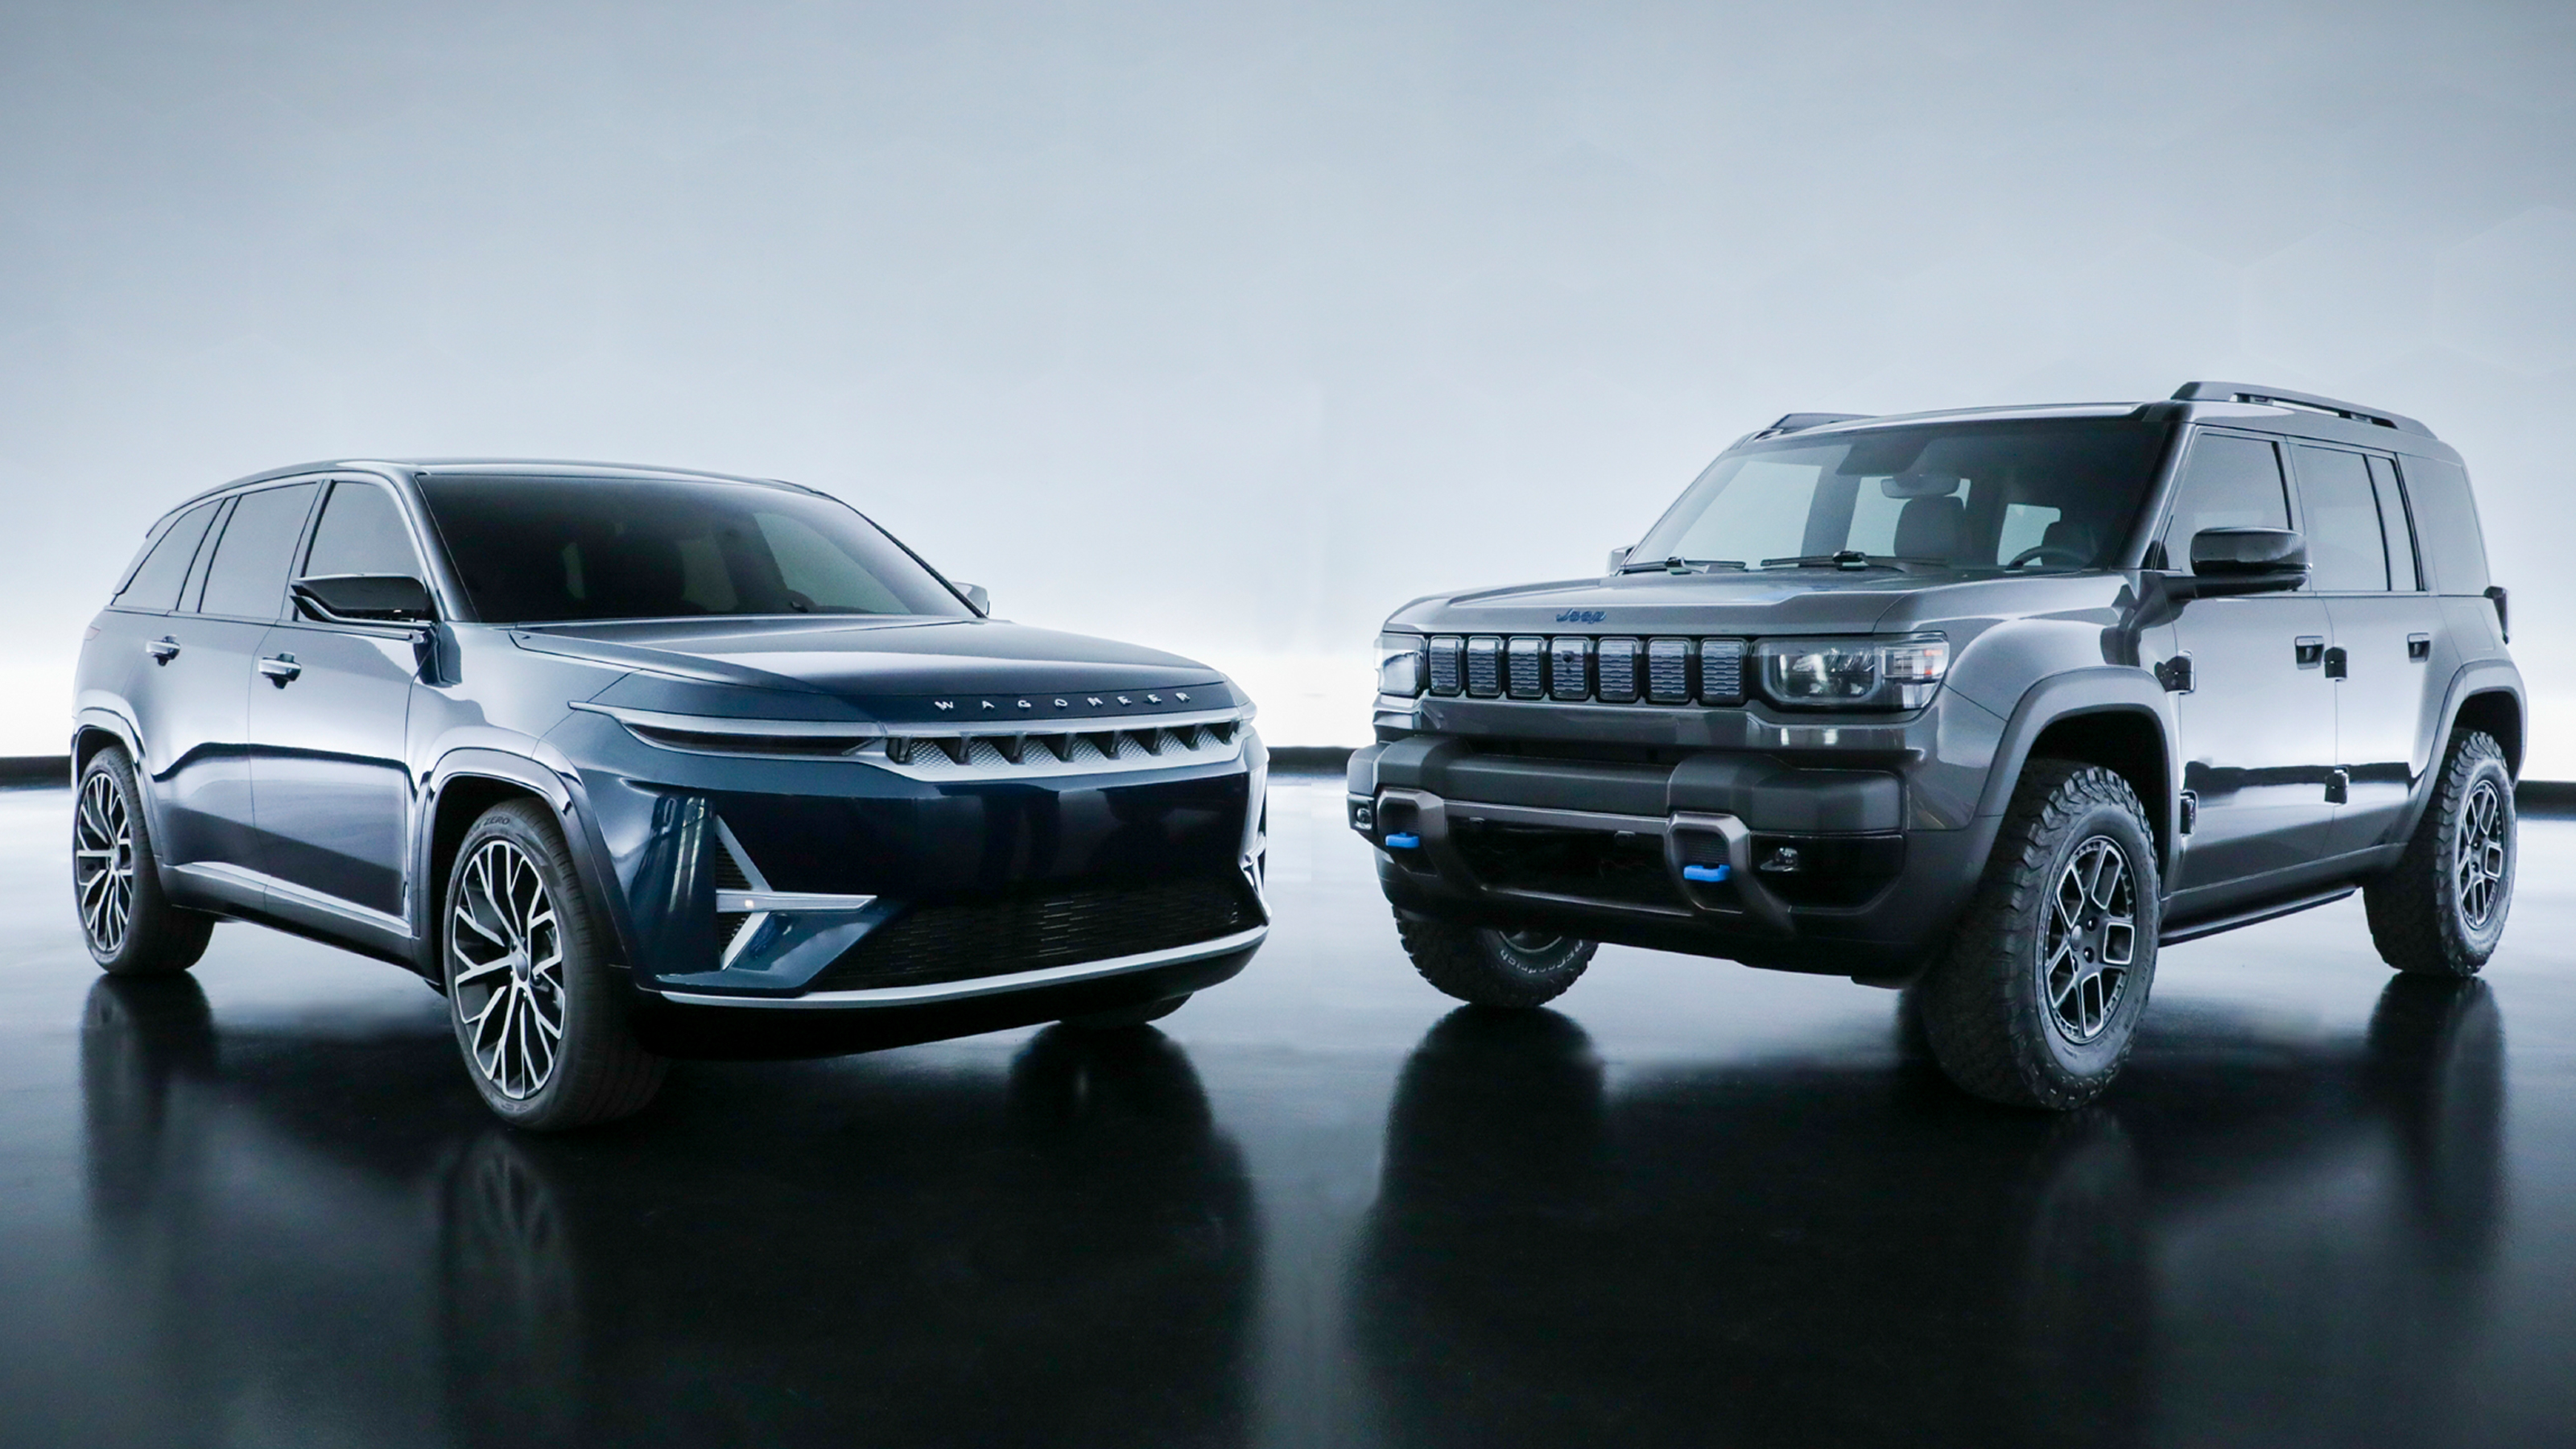 New Jeep Avenger electric SUV: prices, specs, range and first-look